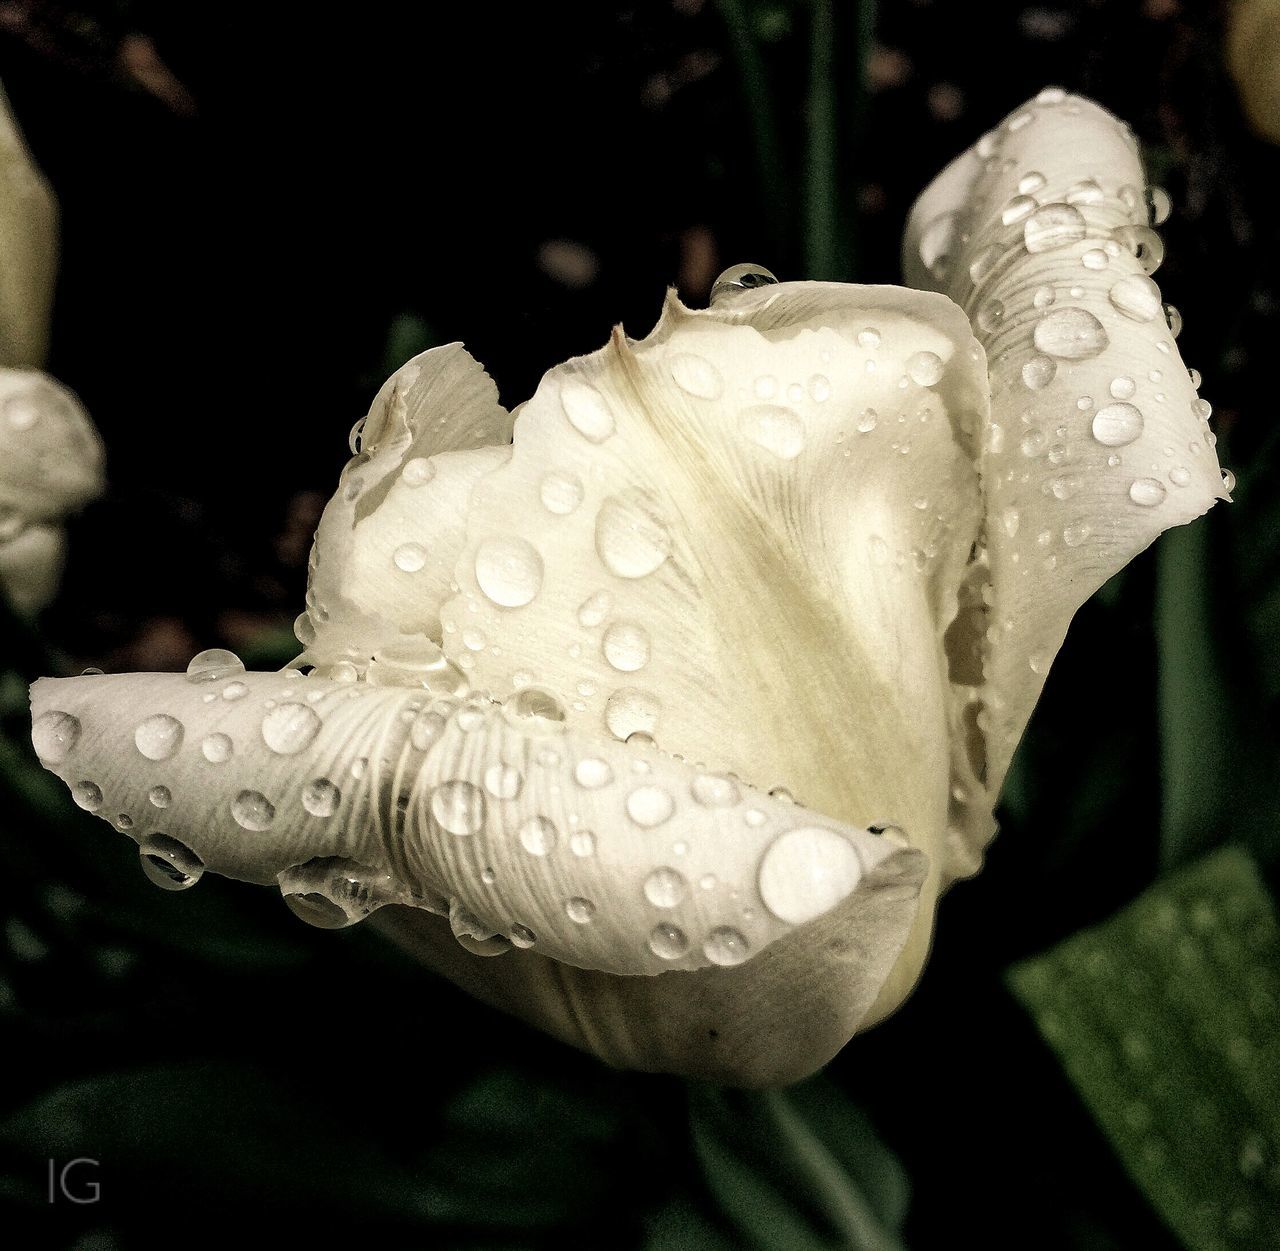 drop, water, wet, close-up, fragility, freshness, flower, beauty in nature, petal, dew, growth, focus on foreground, nature, plant, purity, water drop, raindrop, droplet, flower head, rain